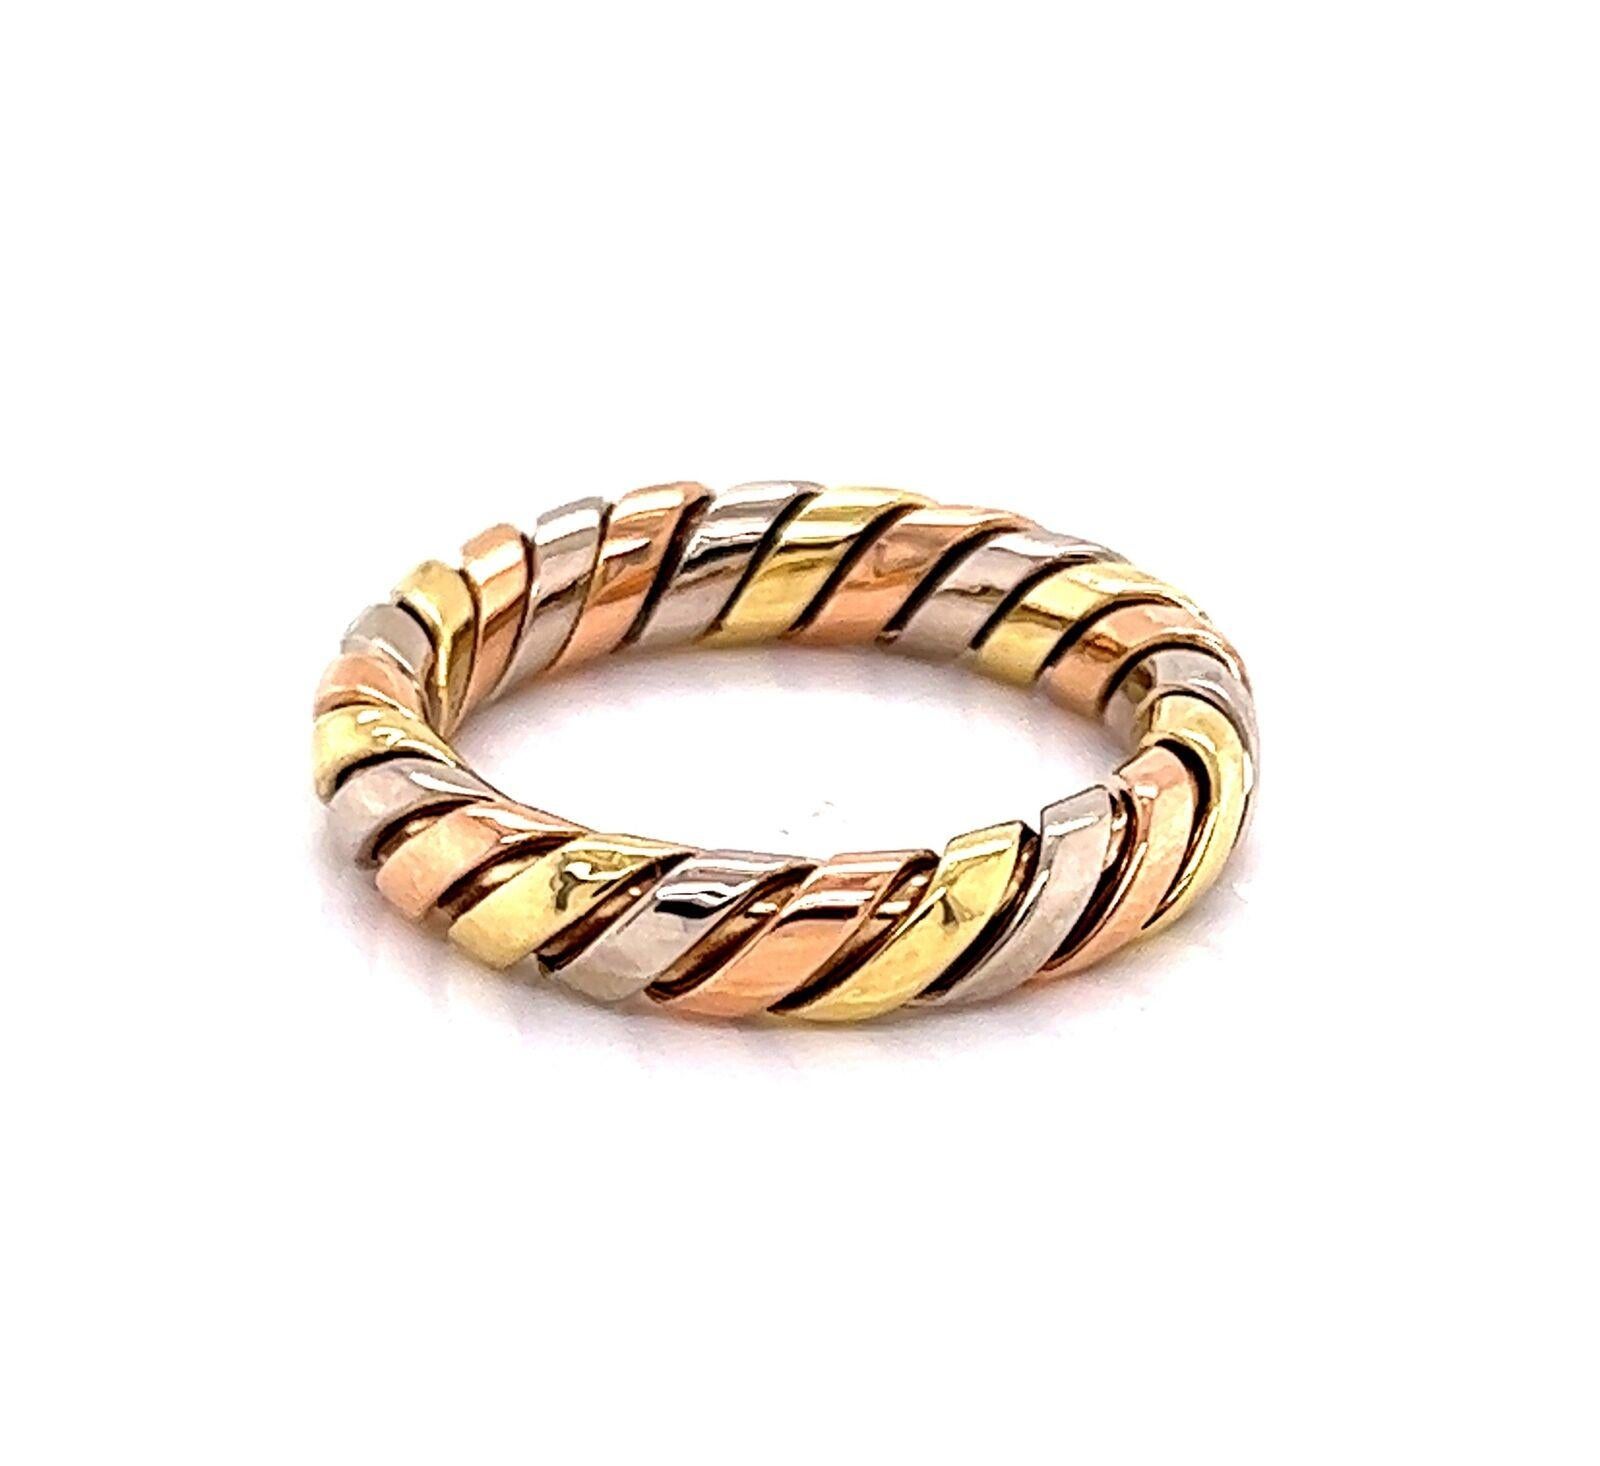 Brand:  Bvlgari
Hallmark: Bvlgari 750 96523
Material:  18k yellow, rose and white gold
Ring Size: 6.5
Weight: 5.3 grams

This authentic Bvlgari band ring is from the Tubogas Collection. It is finely crafted from 18k yellow, white and rose gold with